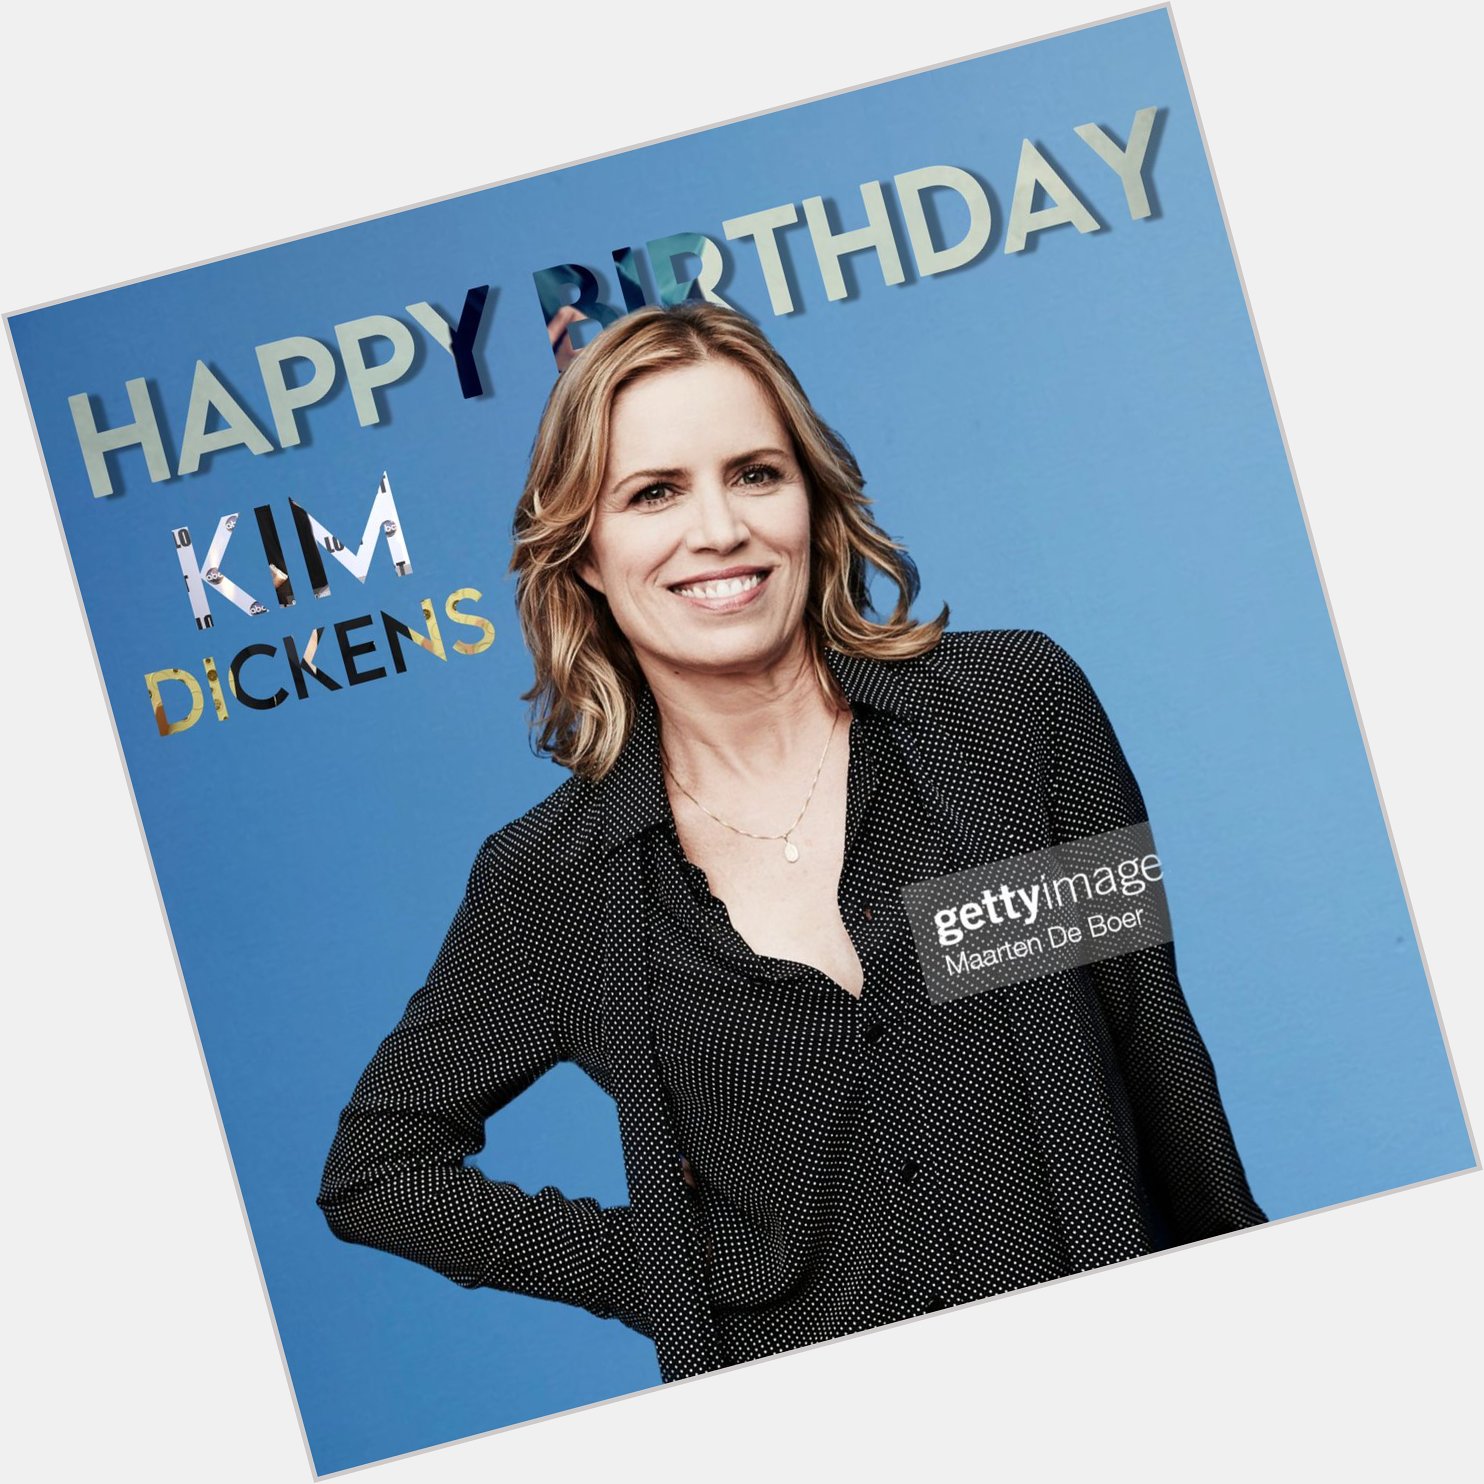 Today Kim Dickens completes another cycle!
Happy birthday      